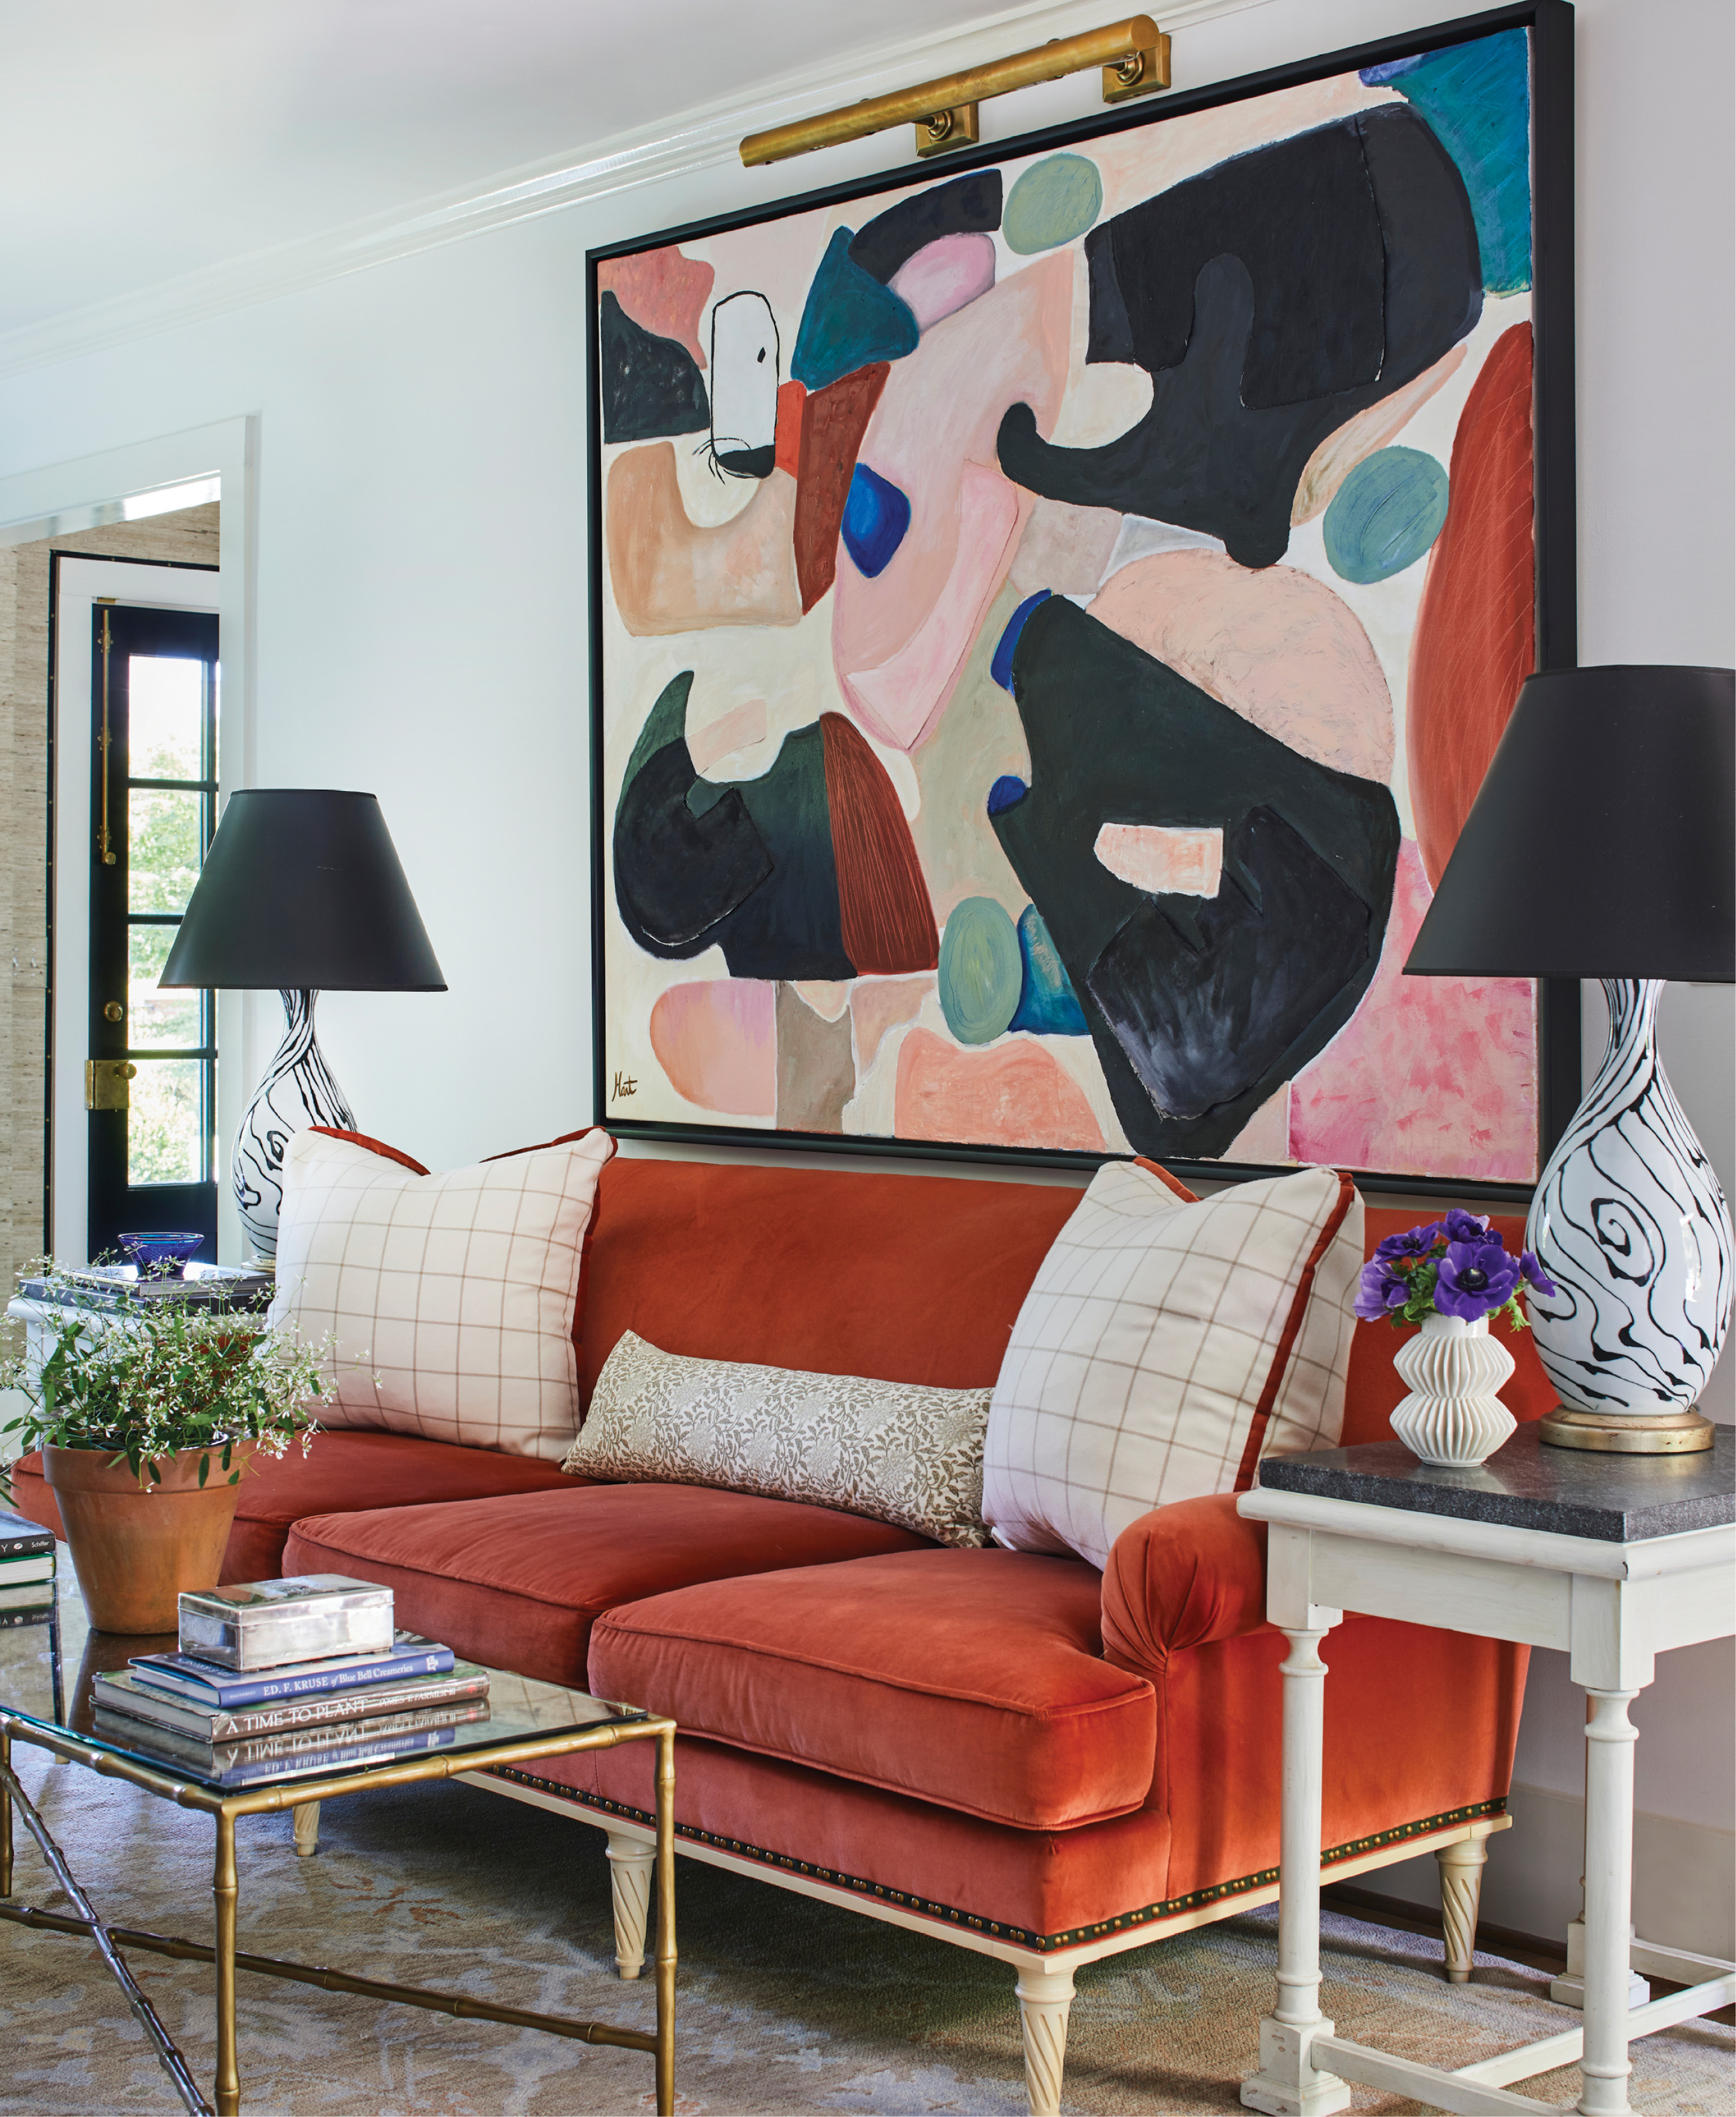 Make a Statement - A large-scale abstract painting by local artist and jewelry designer Hart Hagerty stuns in this Riverland Terrace living room. The art sits amid a vignette reflective of the home at large—a vibrant space where antiques mingle thoughtfully with modern art.